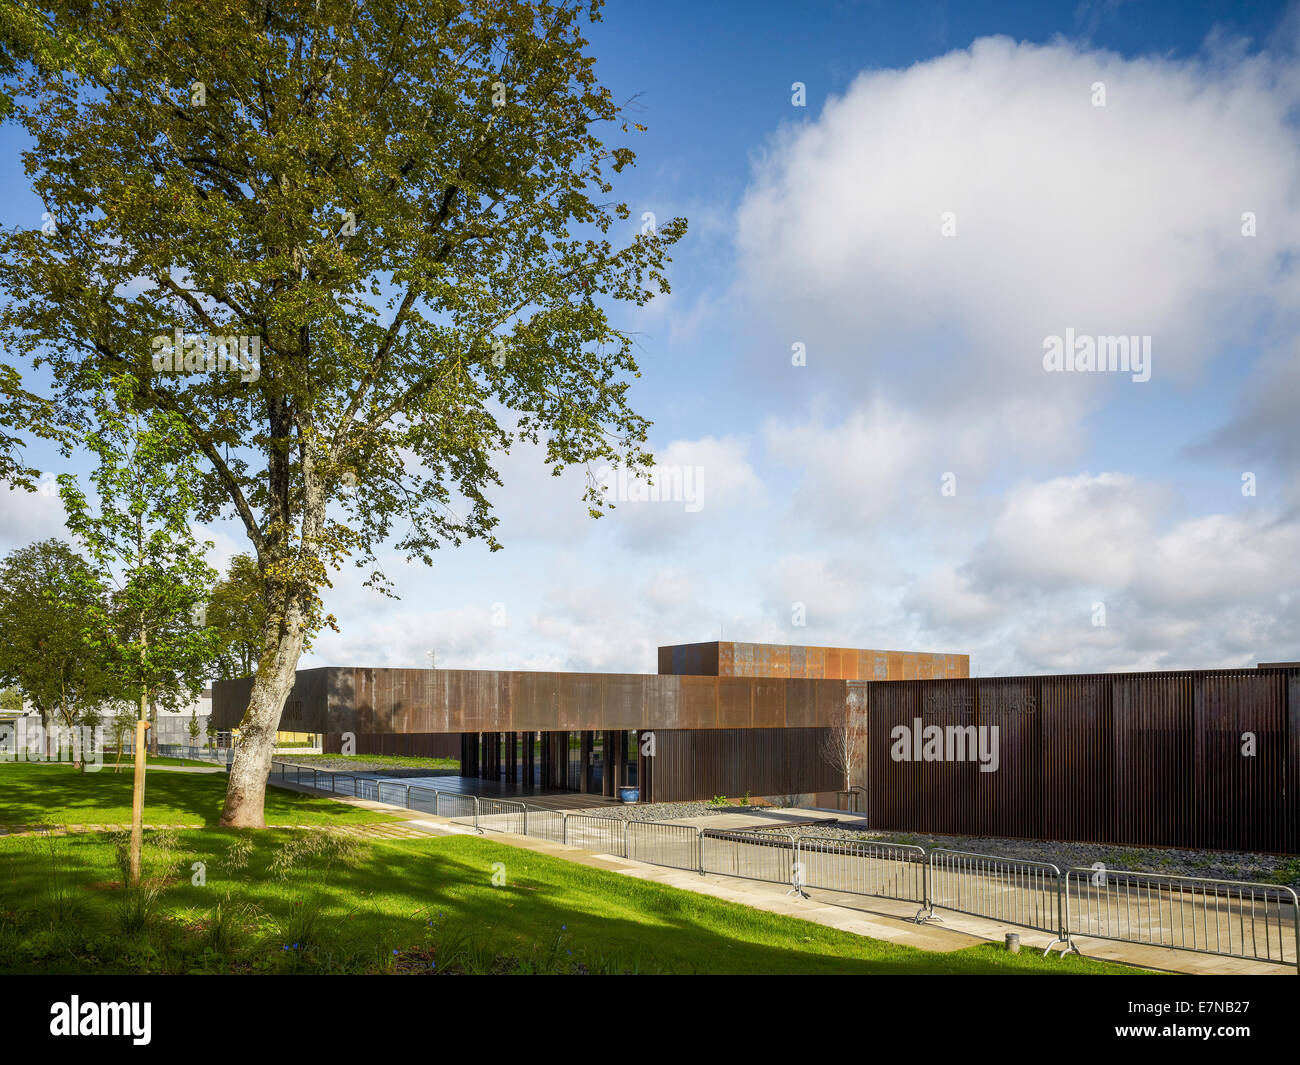 Museum Soulages, Rodez, France. Architect: RCR Arquitectes, 2014. View to cantilevered entrance canopy. Stock Photo